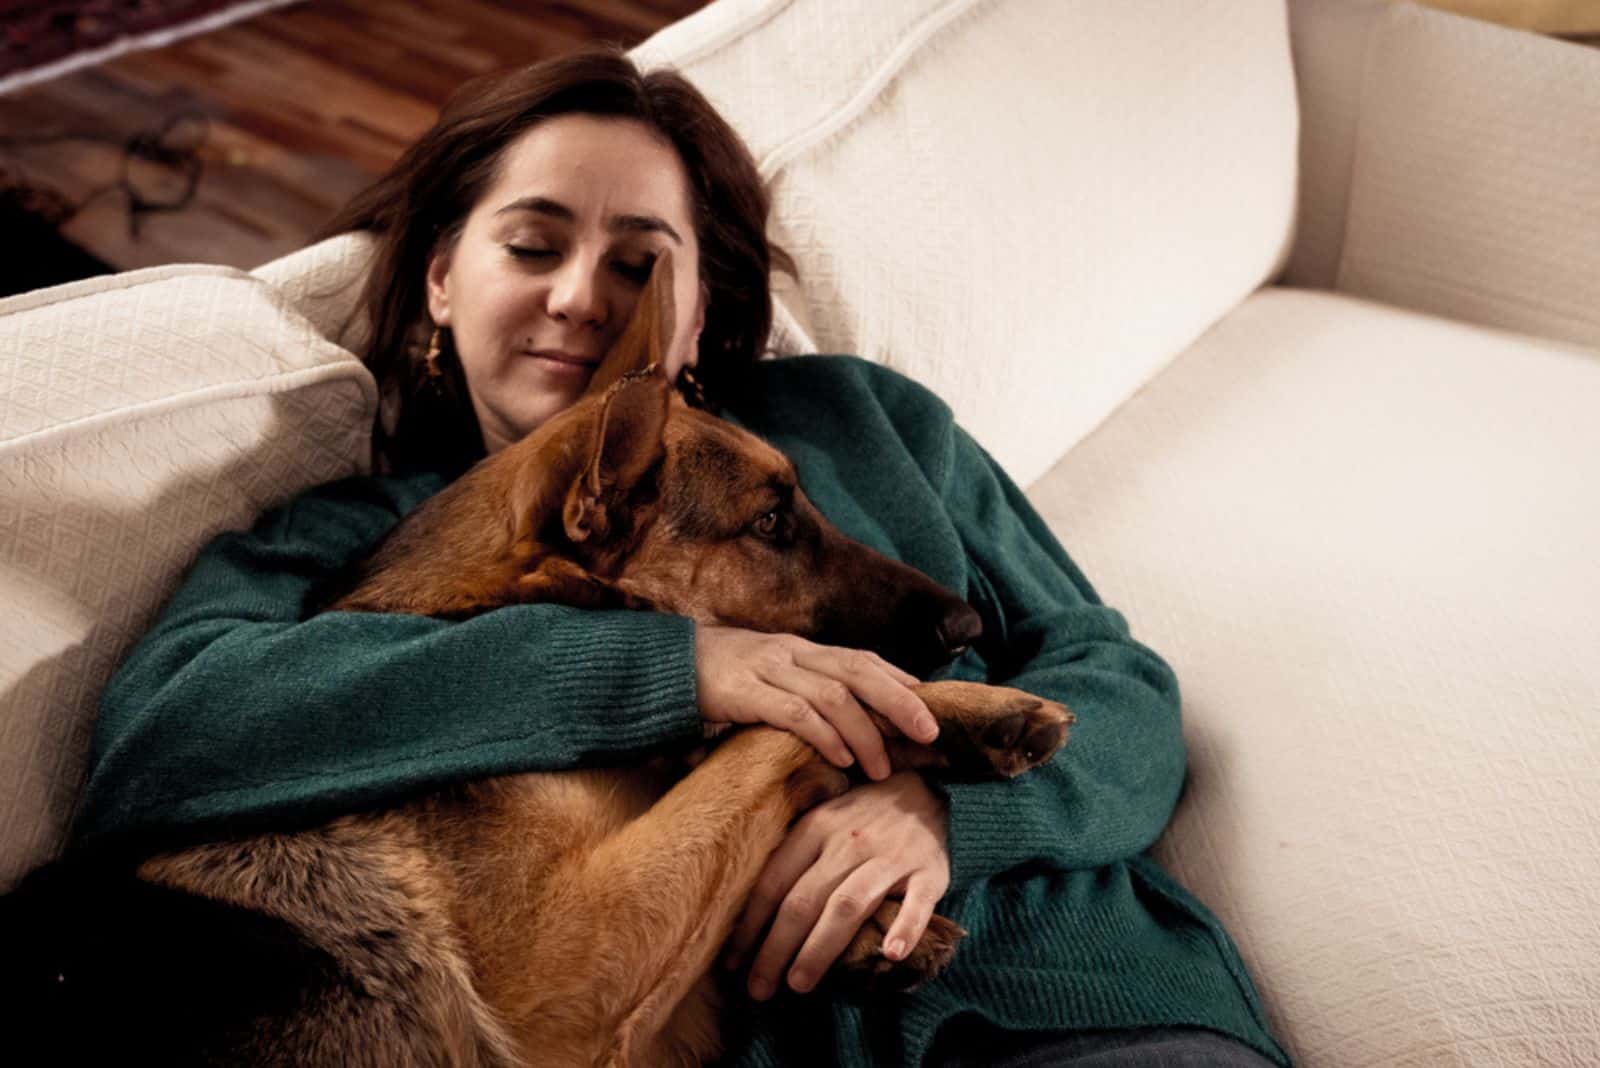 smiling woman cuddling with her dog on couch